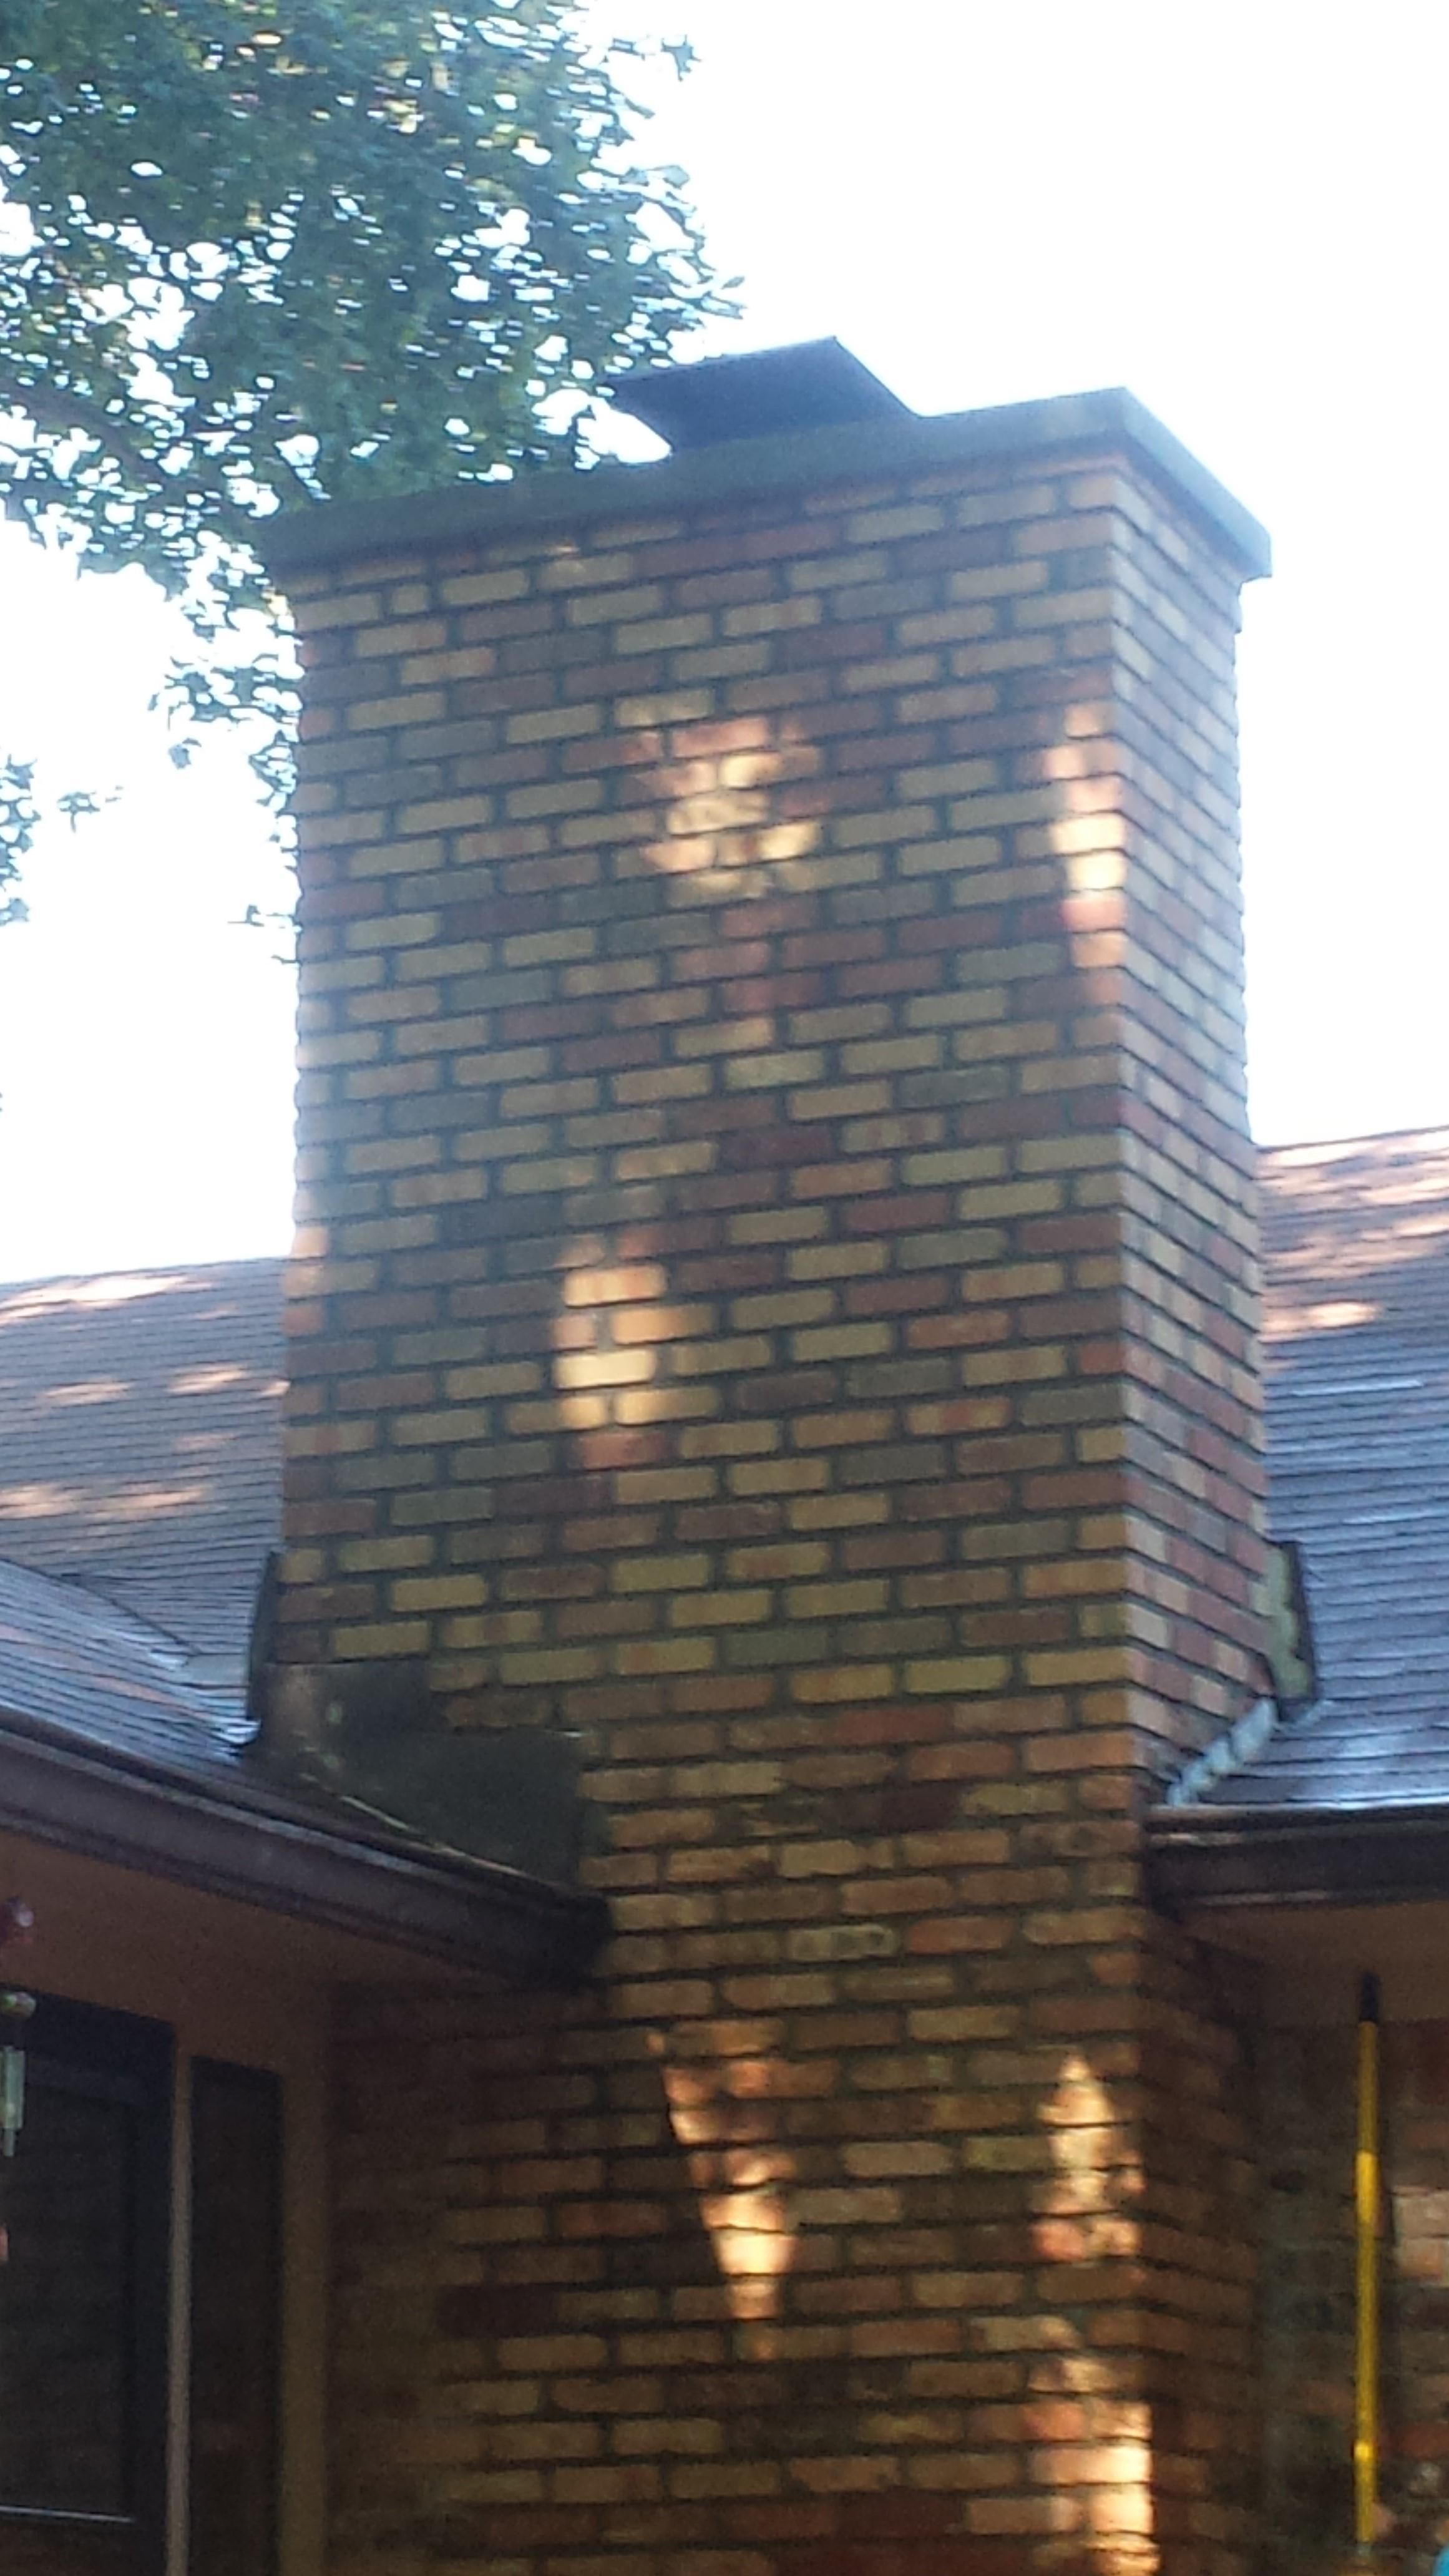 After demo and replacement of the masonry we installed a new cap and sealed entire chimney.